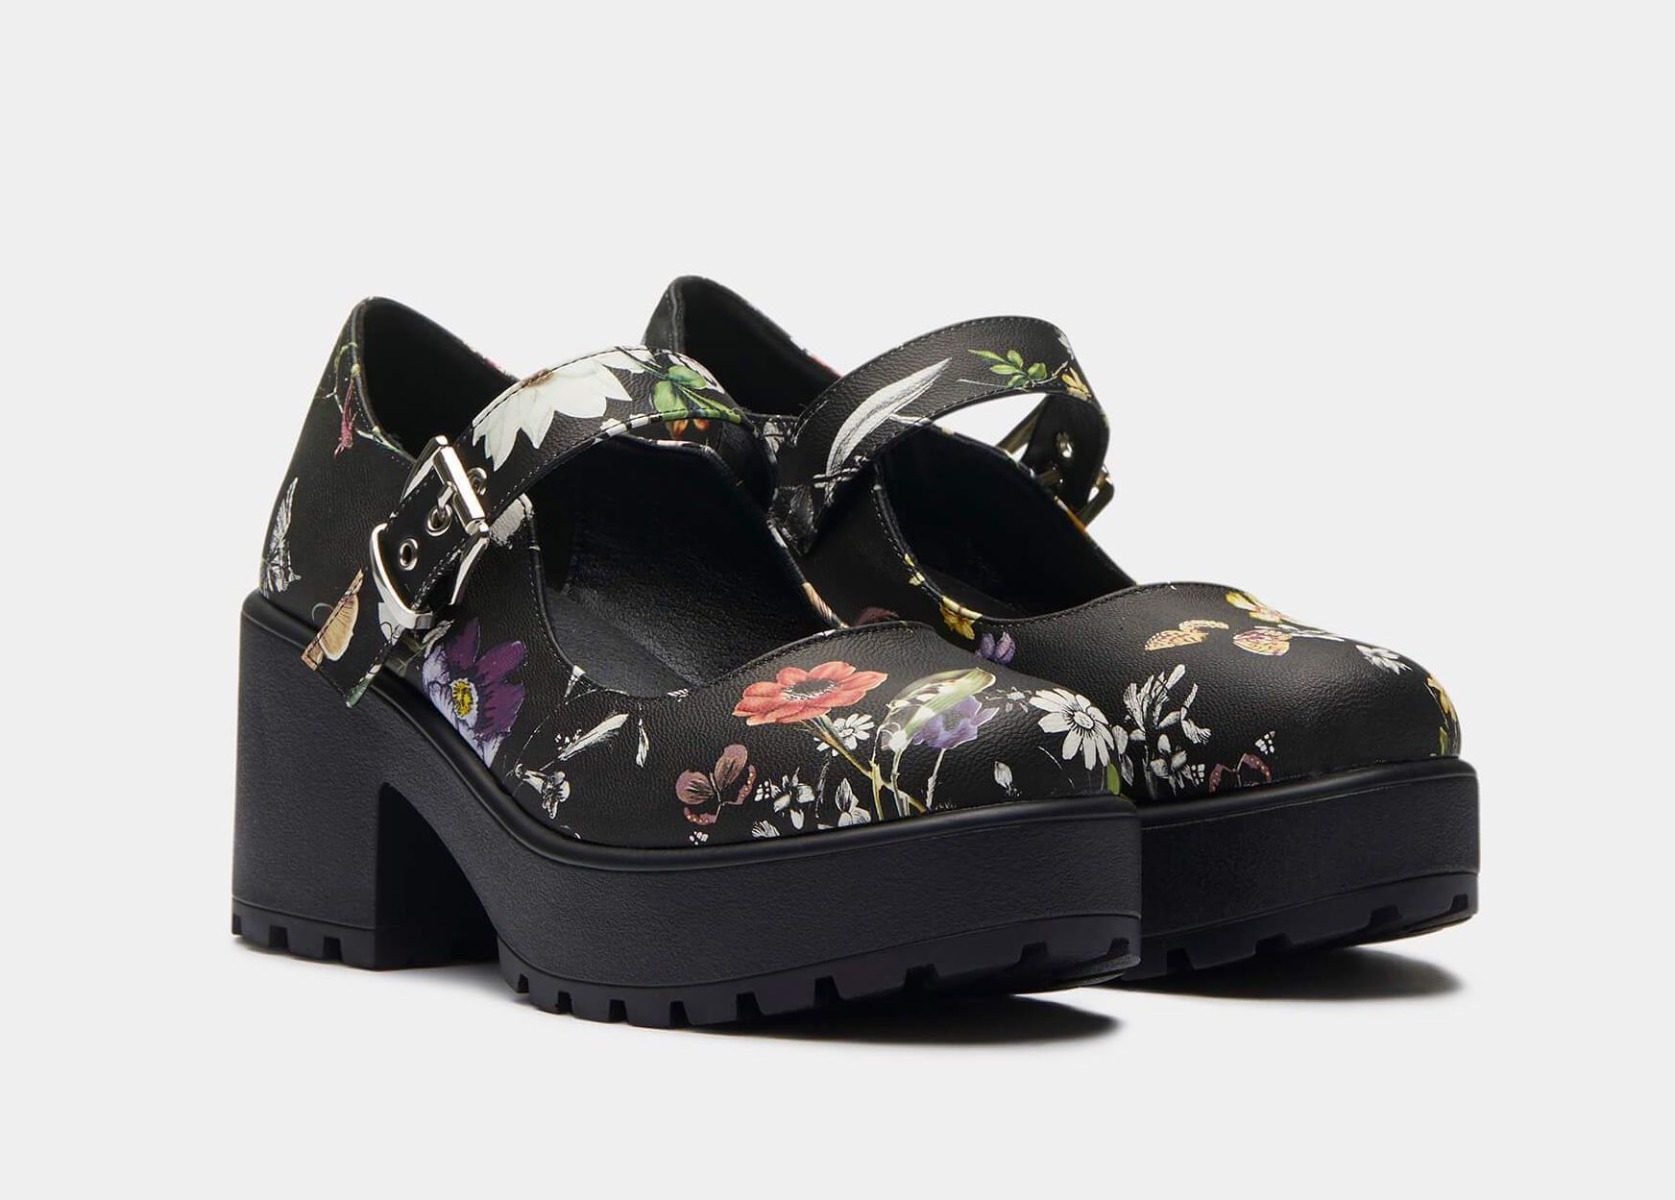 kfnd68bb_chaussures-mary-jane-plateforme-gothique-glam-rock-tira-floral